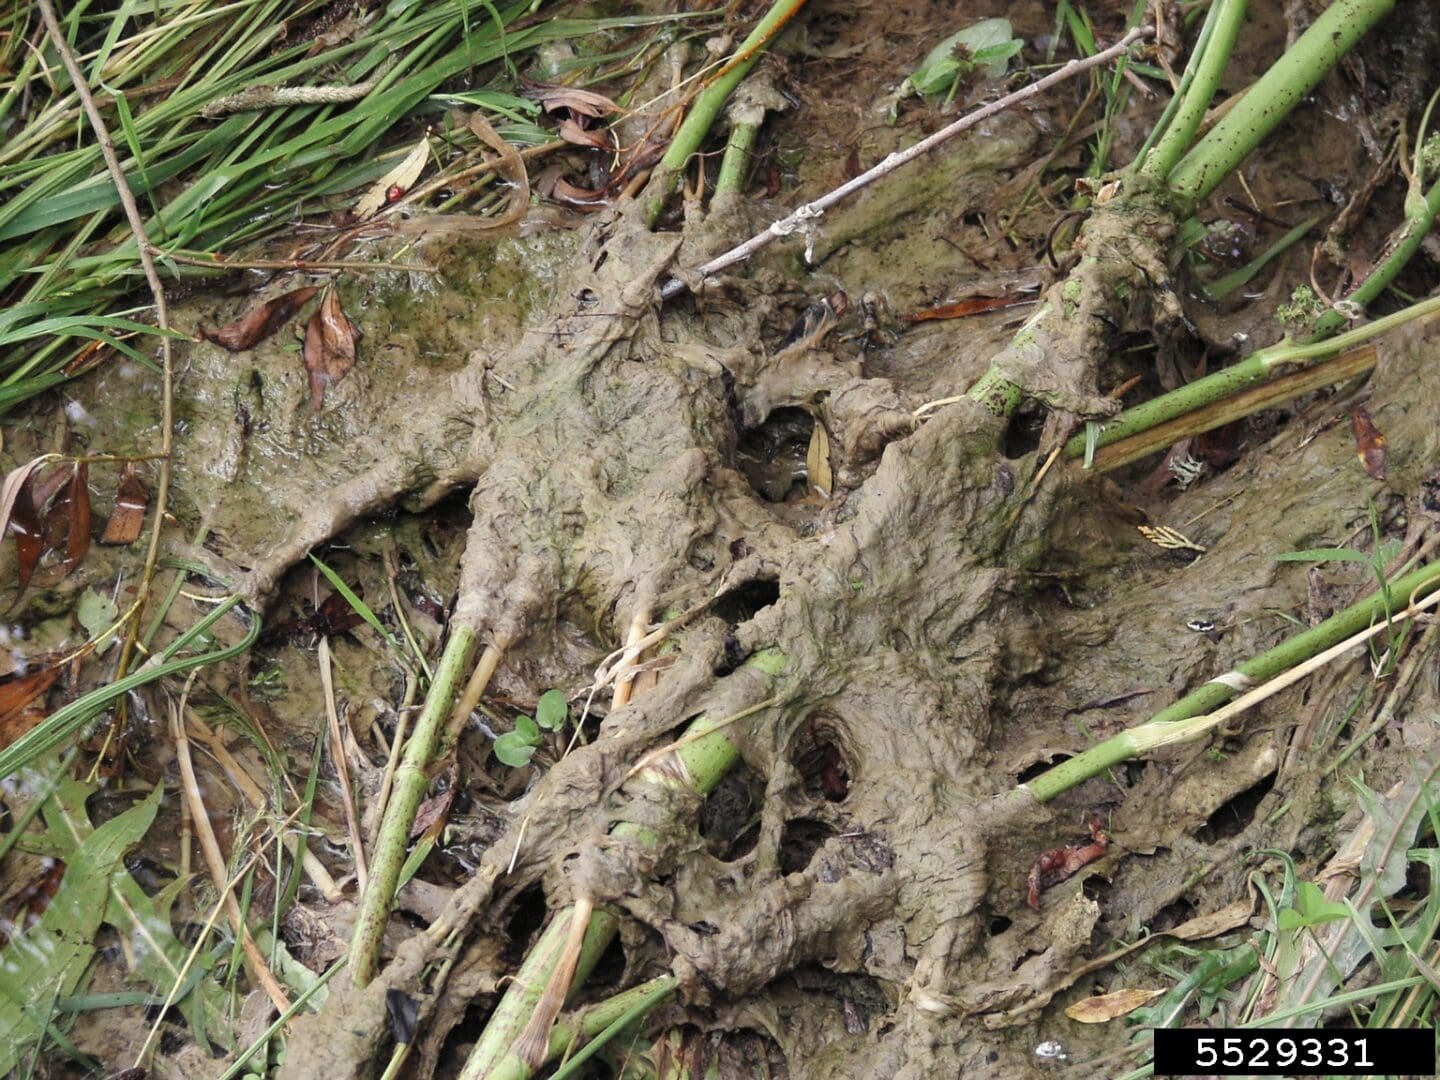 A close up of the roots and stems of plants.